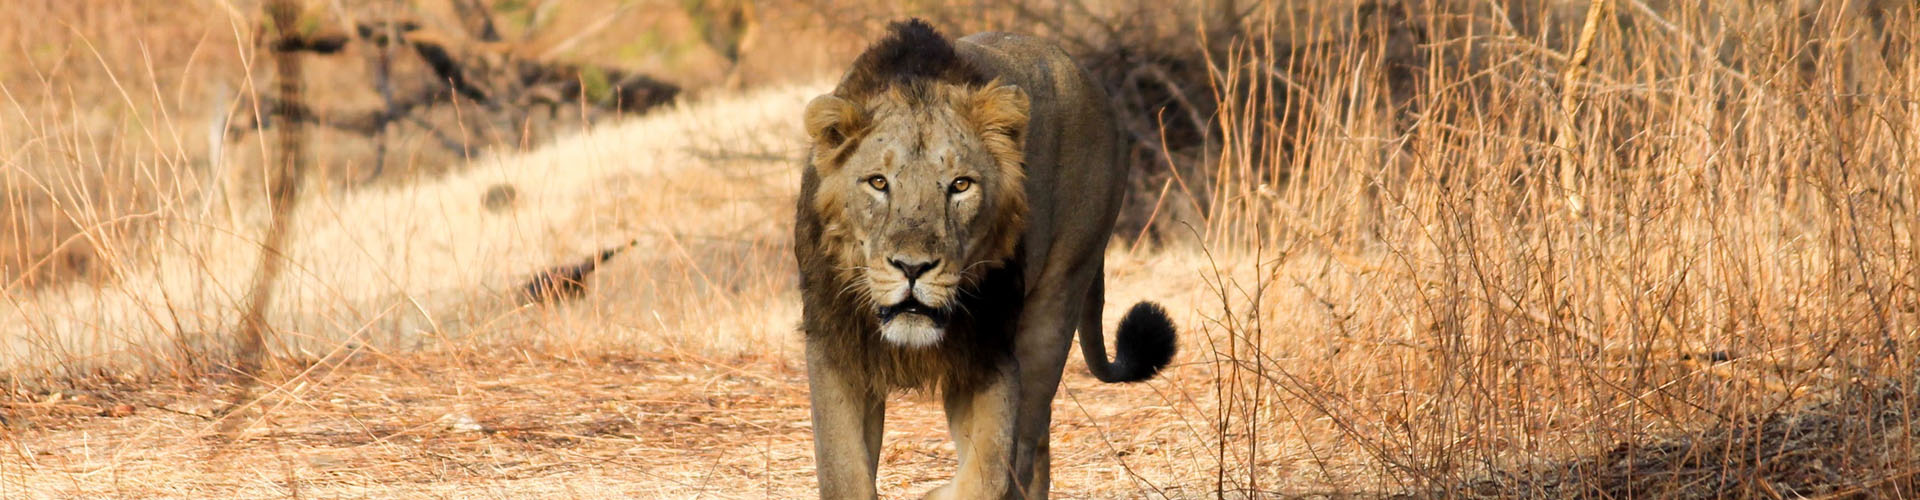 Gir Safari Tour and Packages